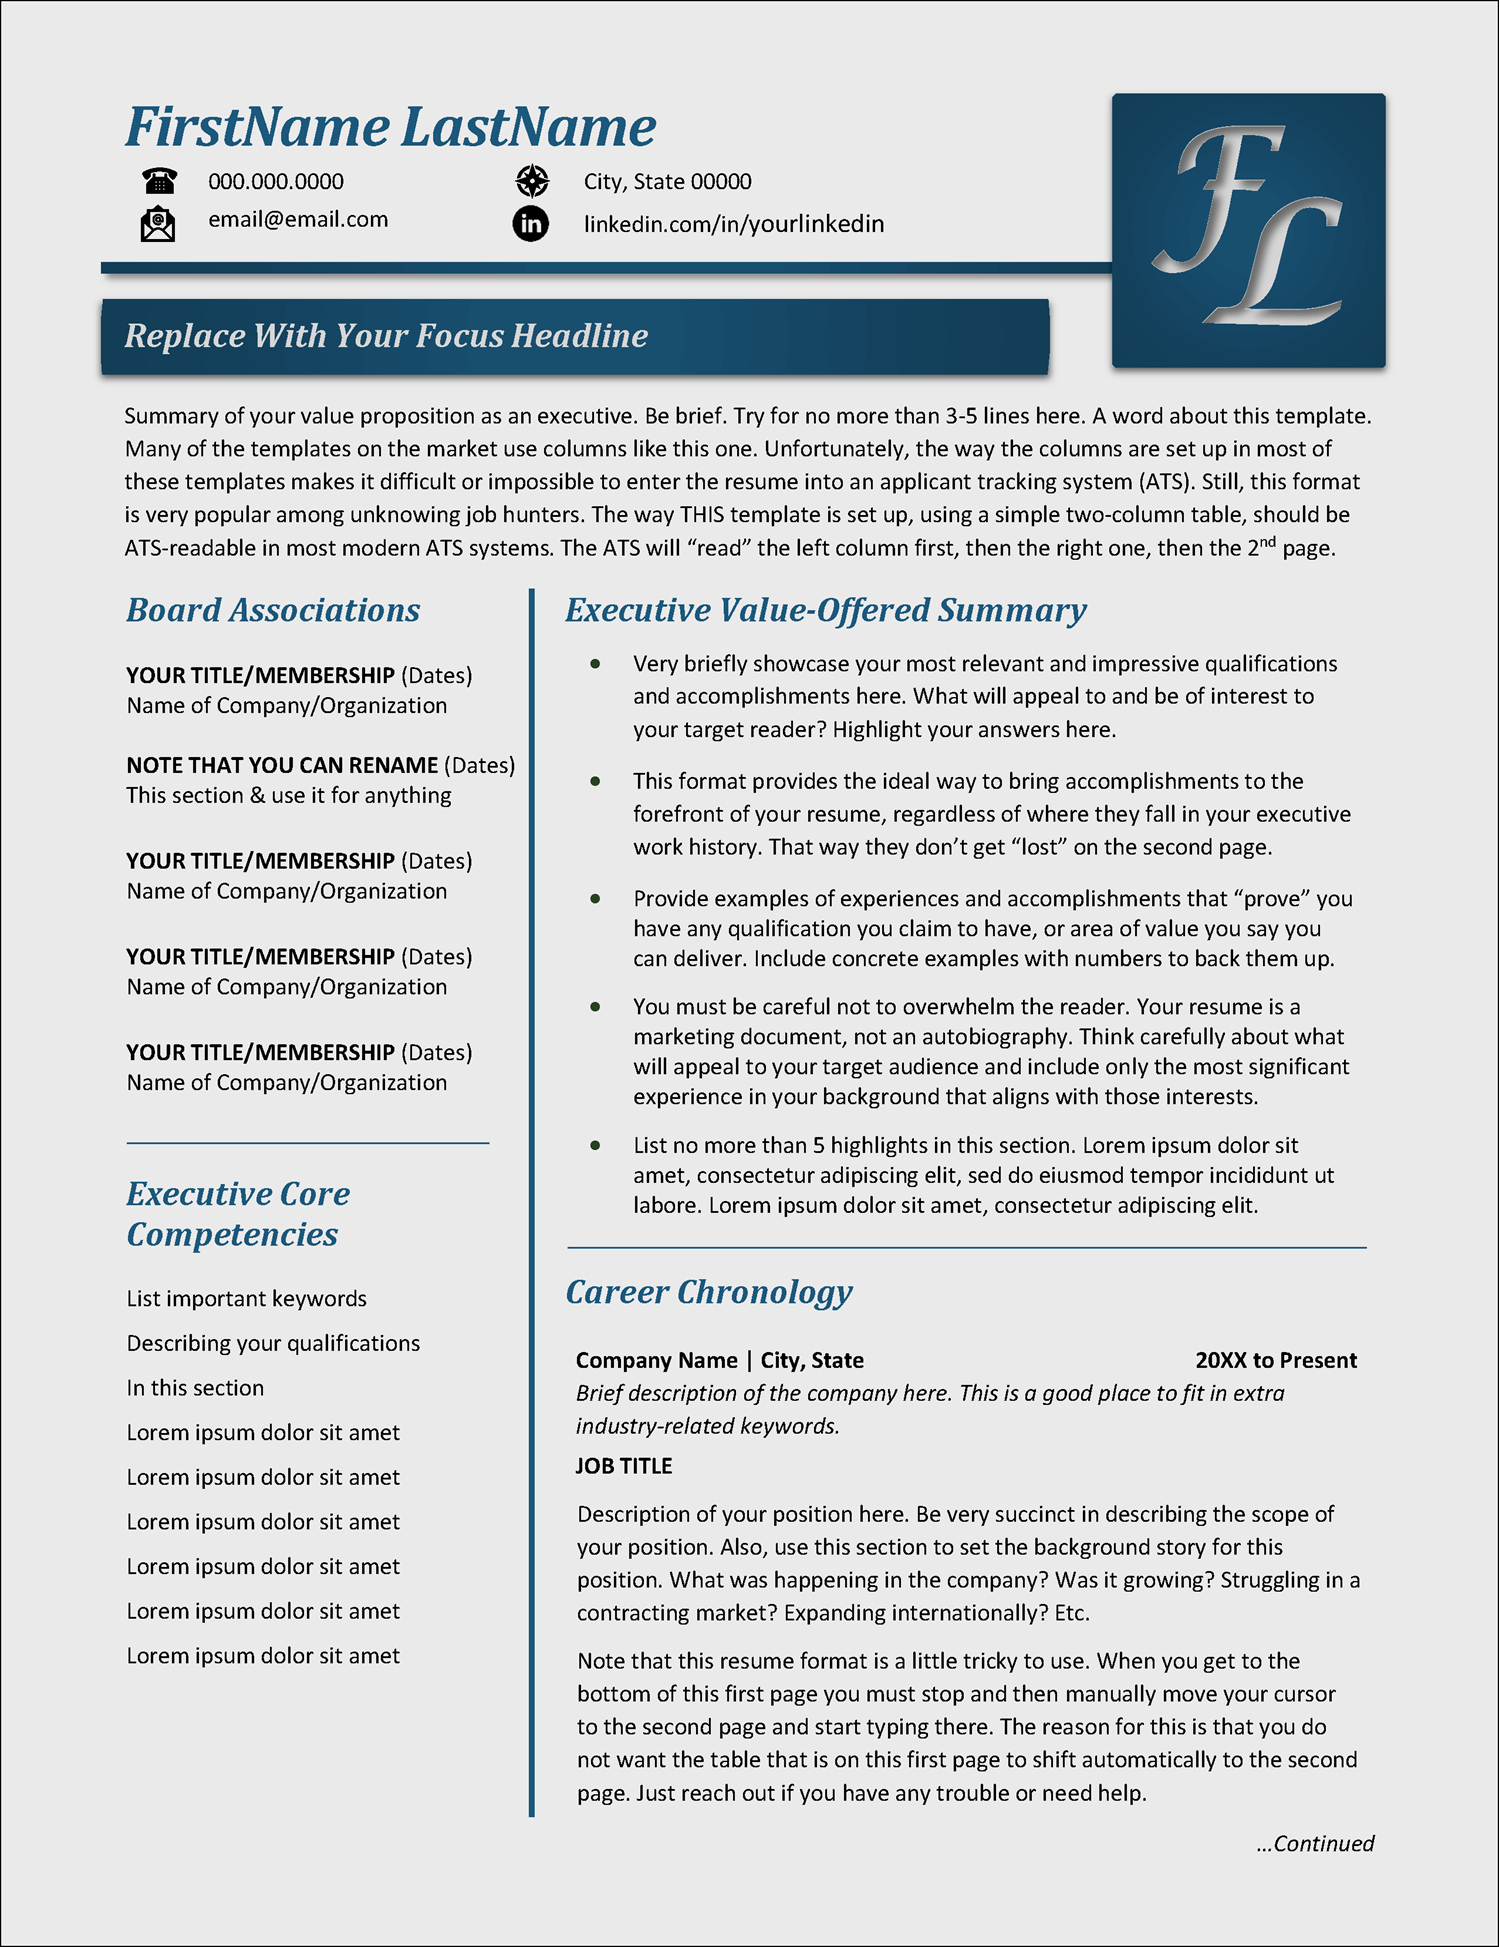 Resume Template for Senior Executives Page 1